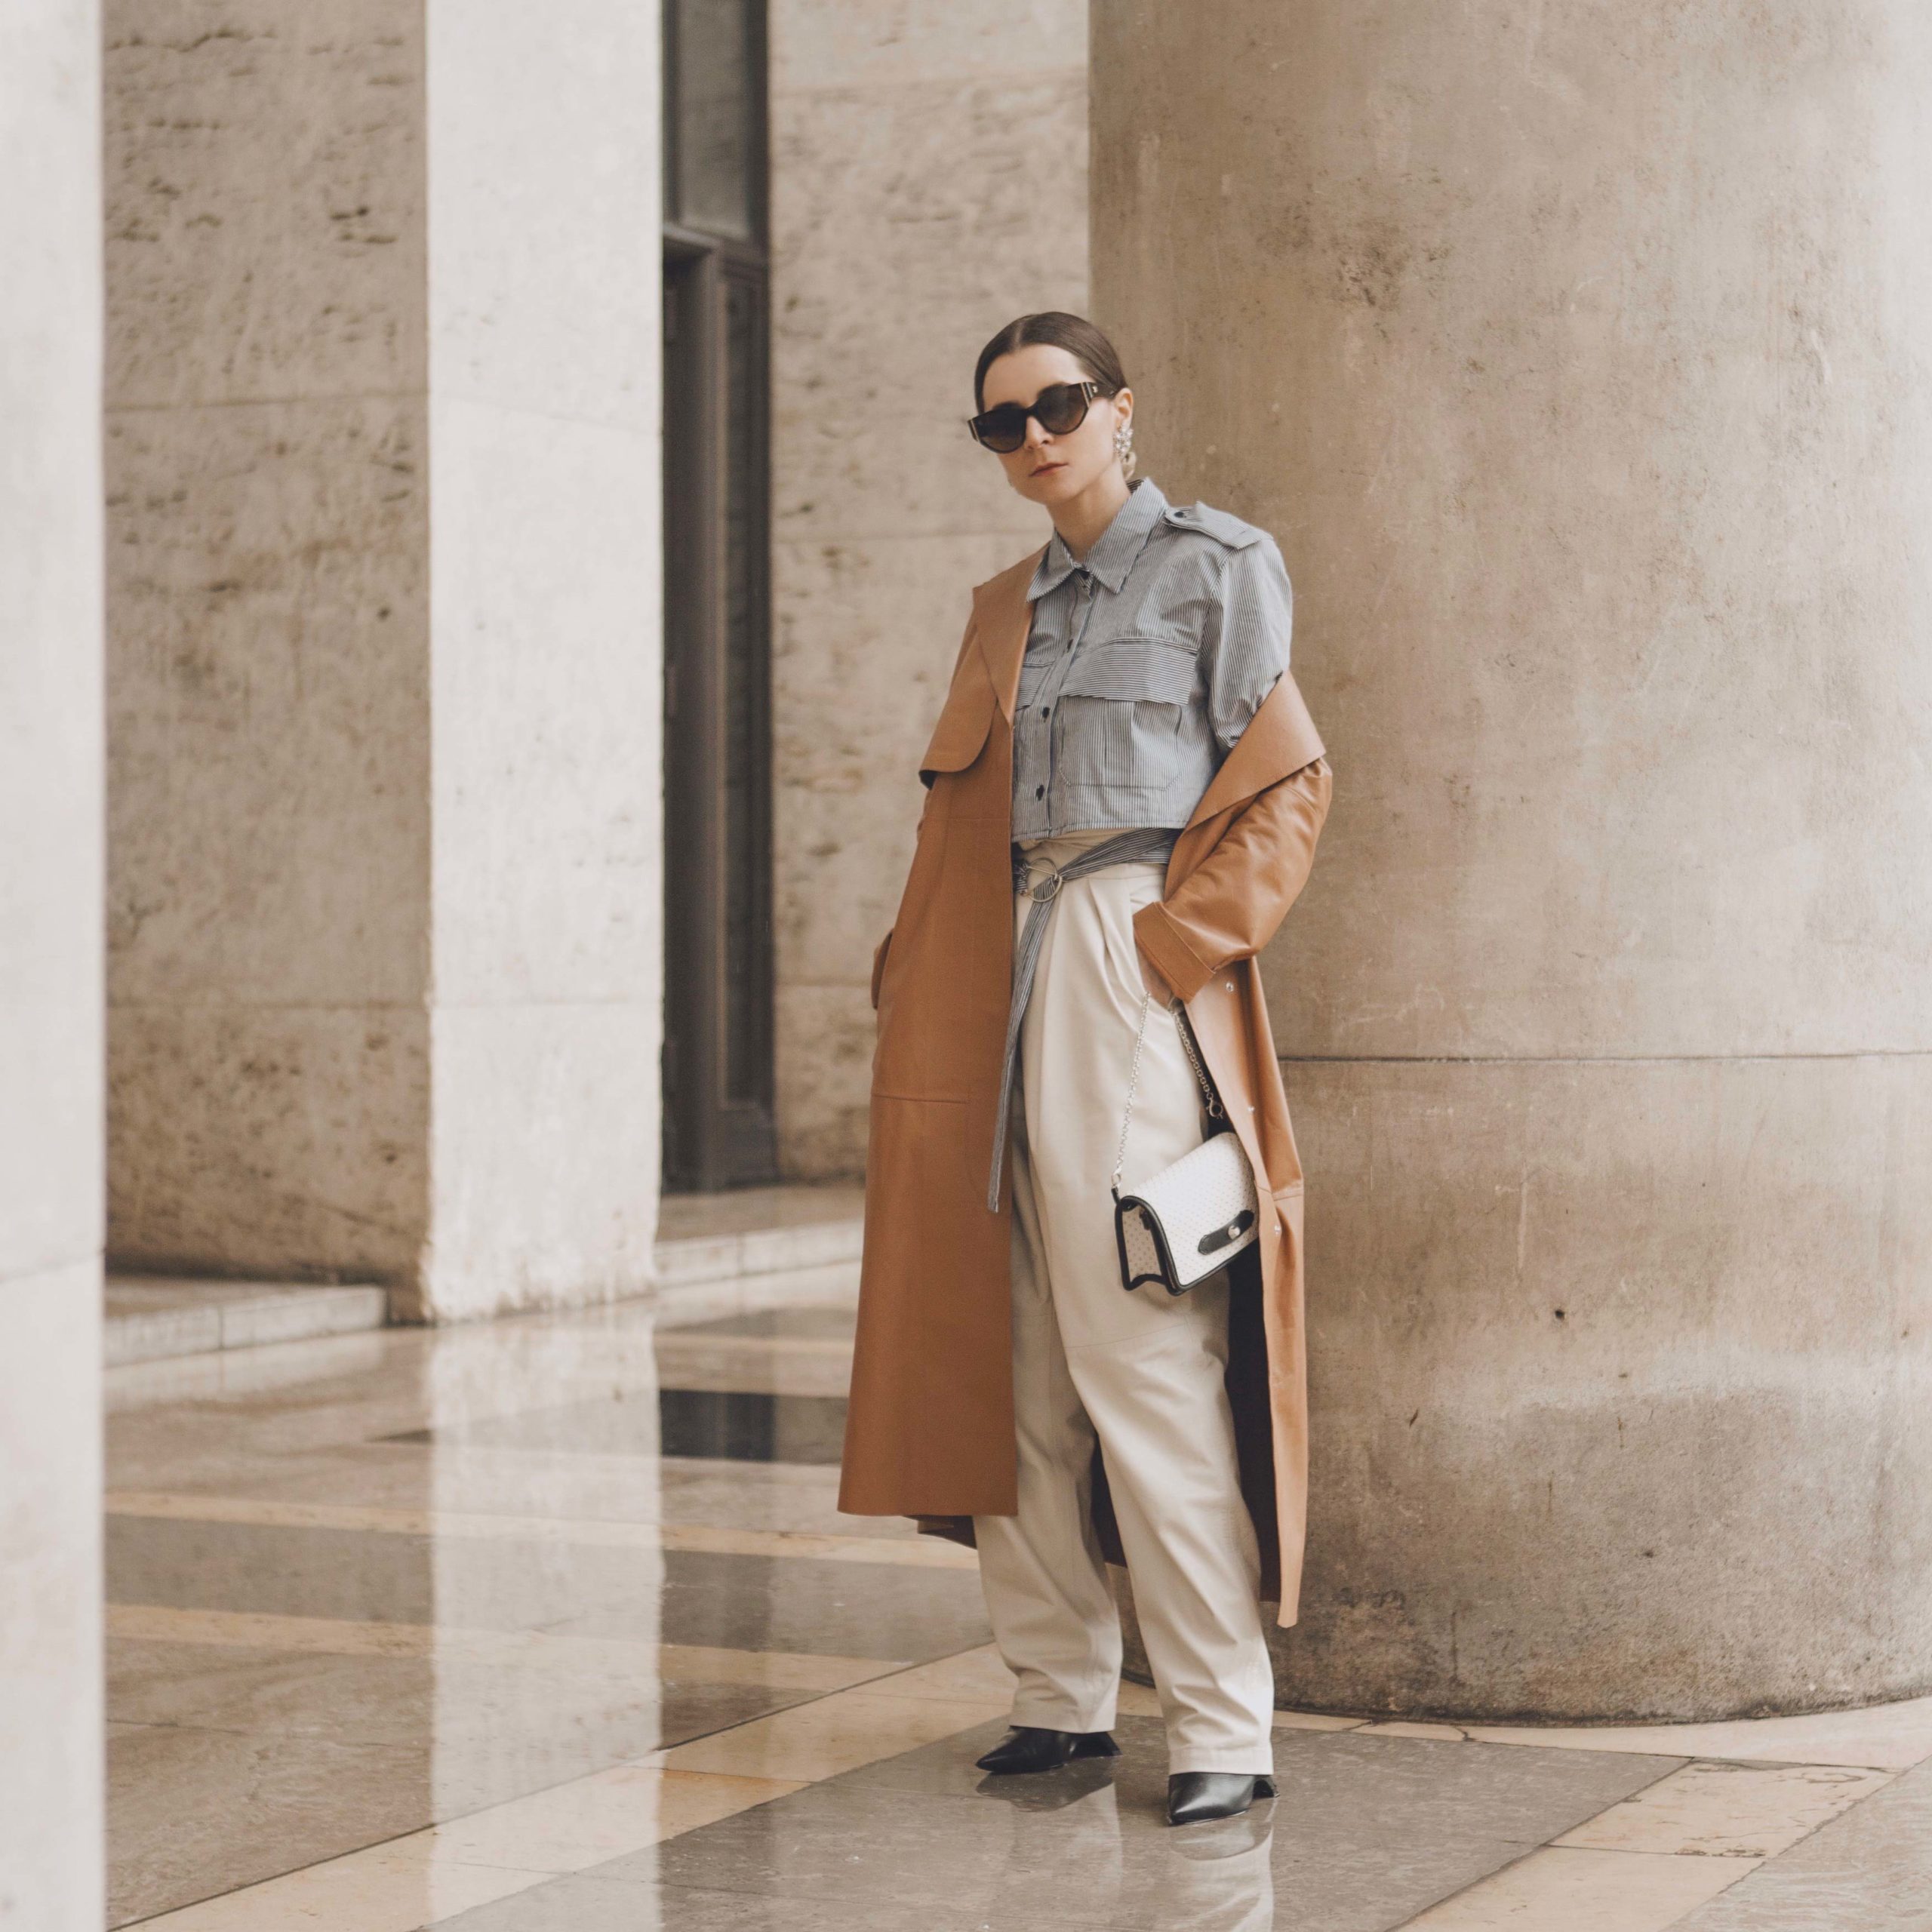 caramel trench paris fashion week street style 2020 AW march 2020 julia comil sportmax the frankie shop l etrange paris french fashion influencer in los angeles